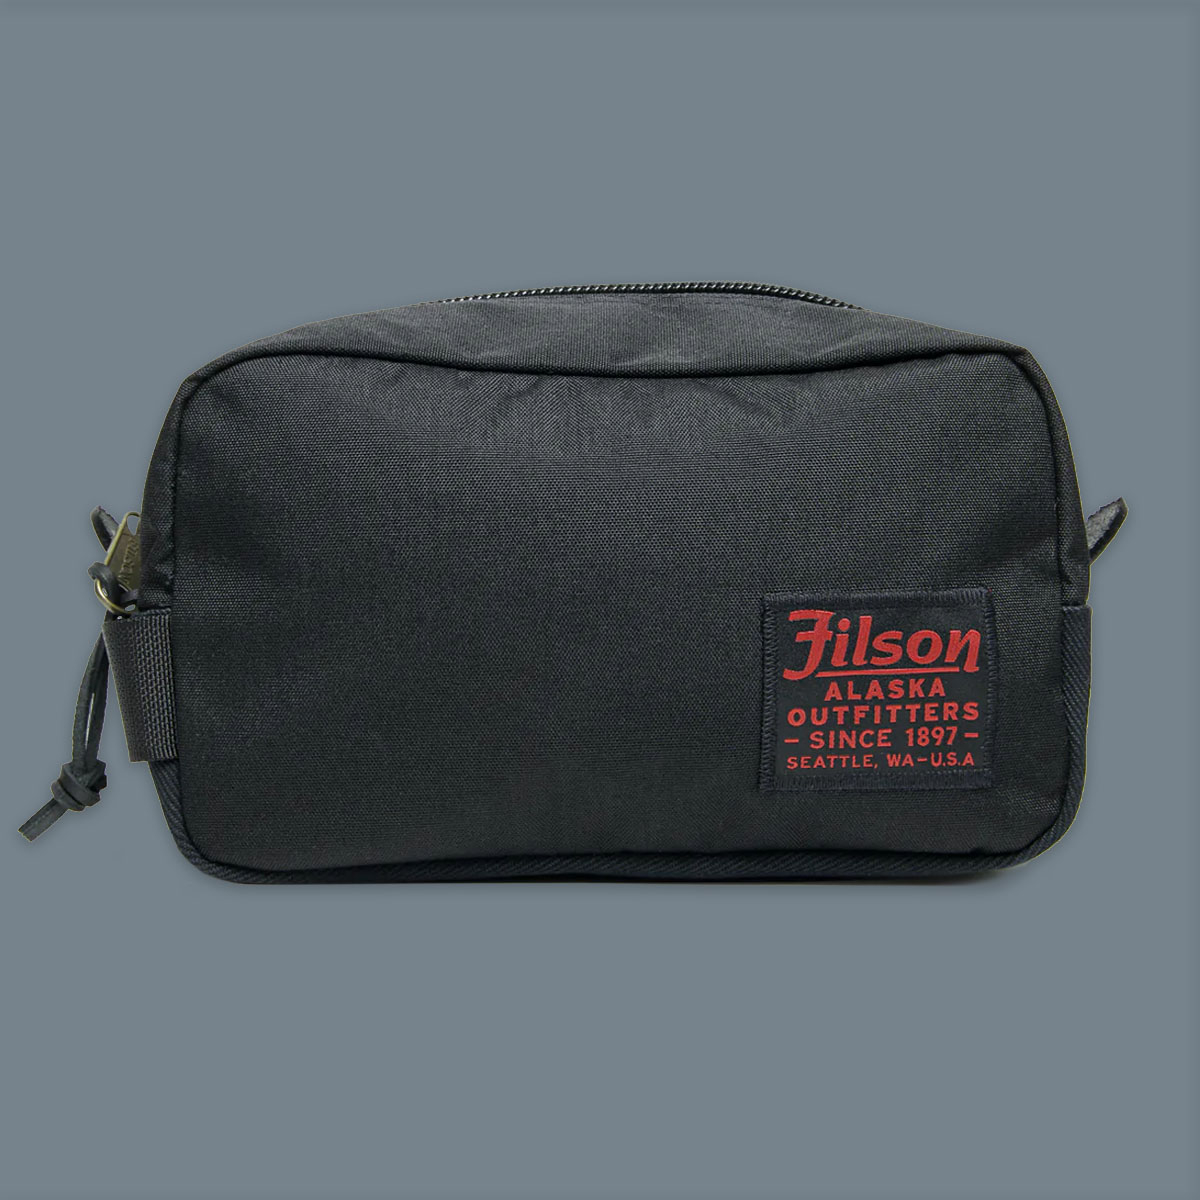 Filson Travel Pack Dark Navy, made of tear-resistant ballistic nylon and reinforced with Filson's famous Rugged Twill